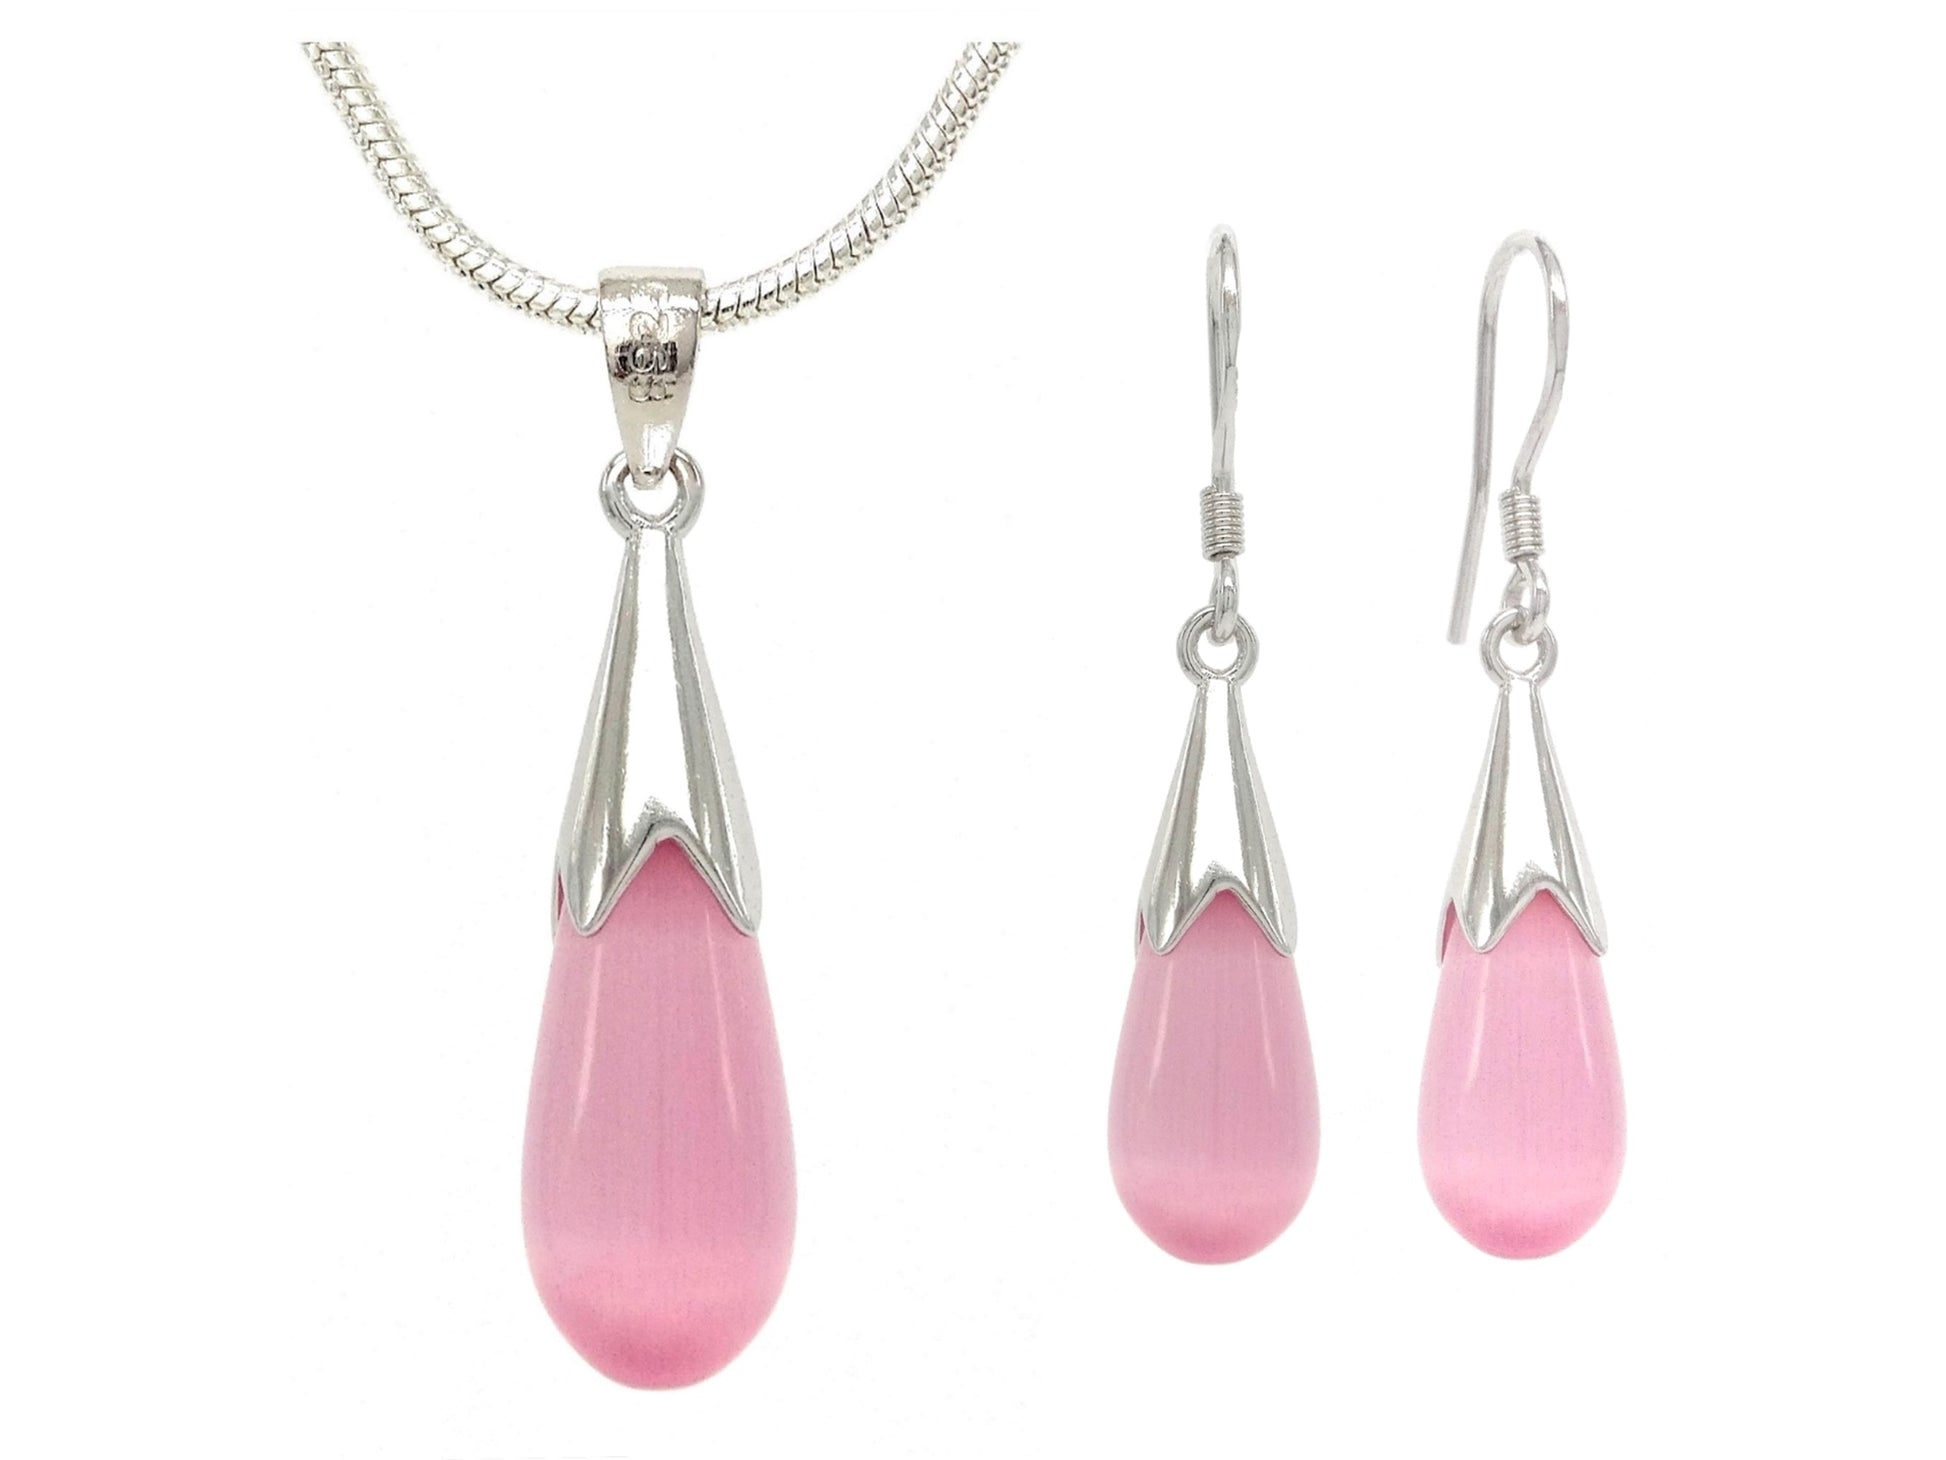 Pink moonstone drop necklace and earrings MAIN